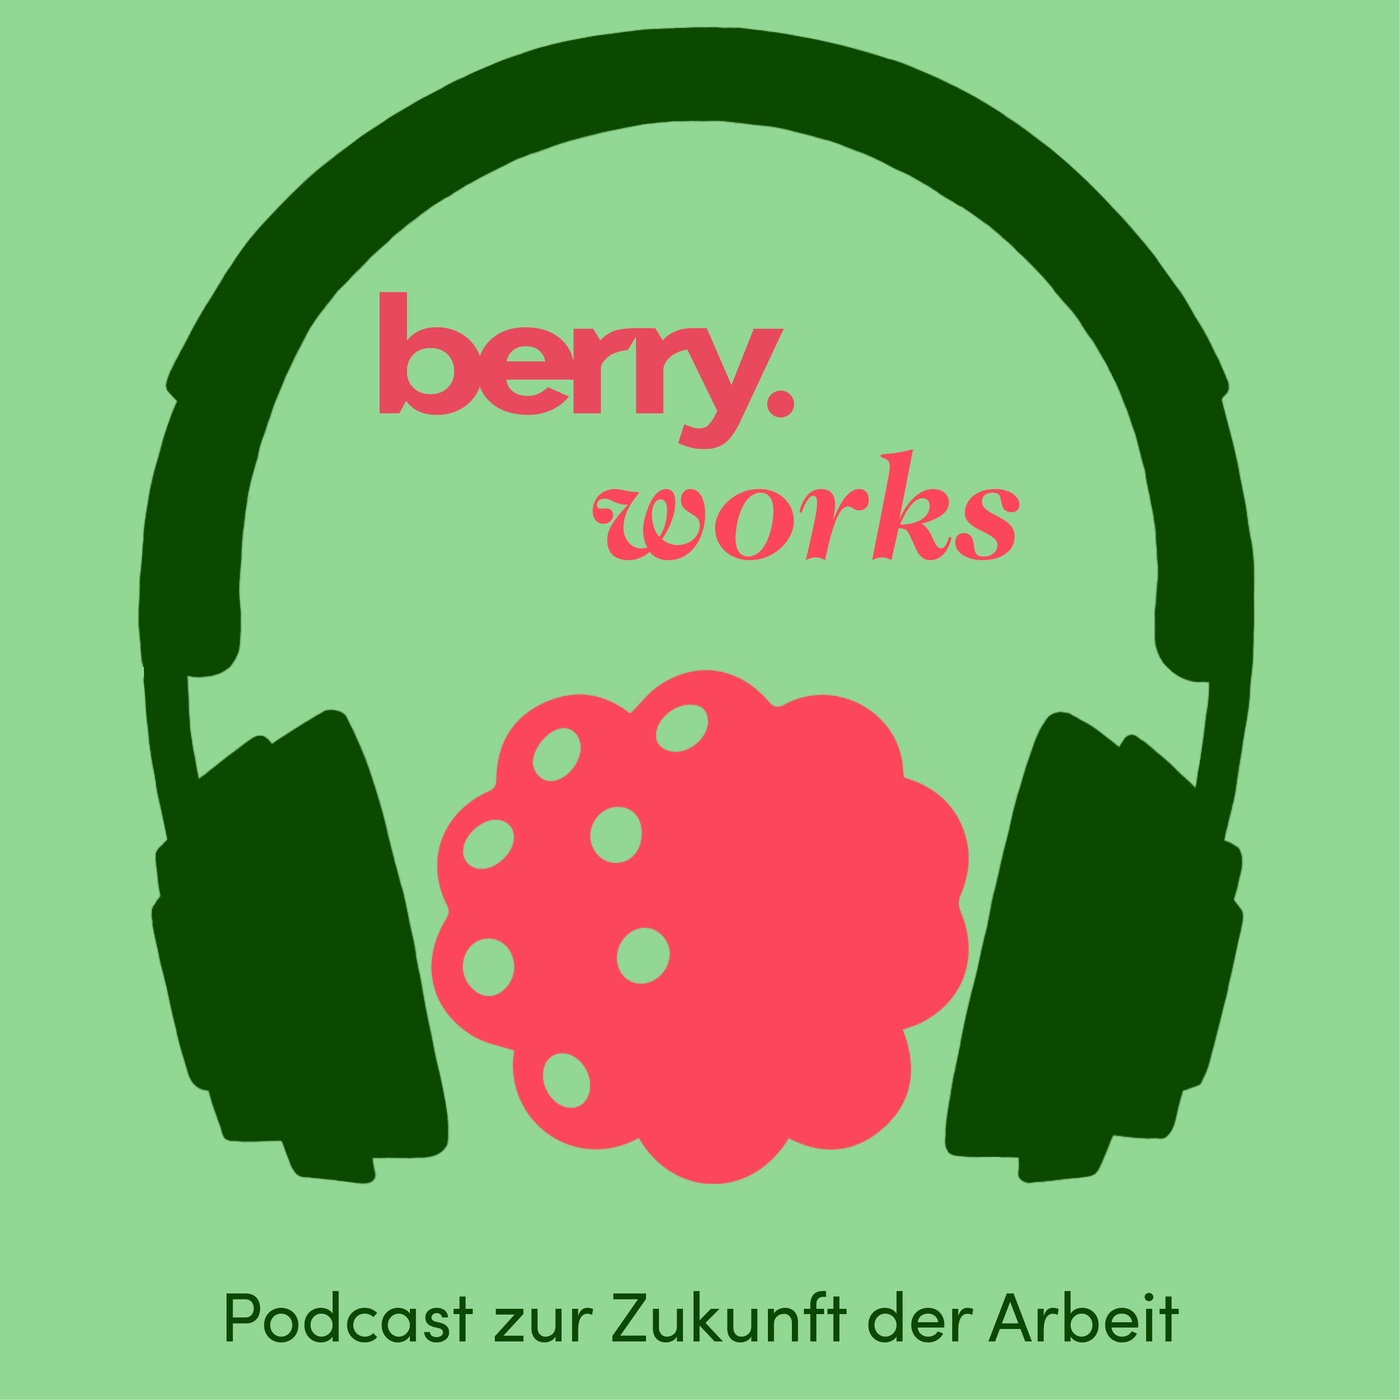 berry works